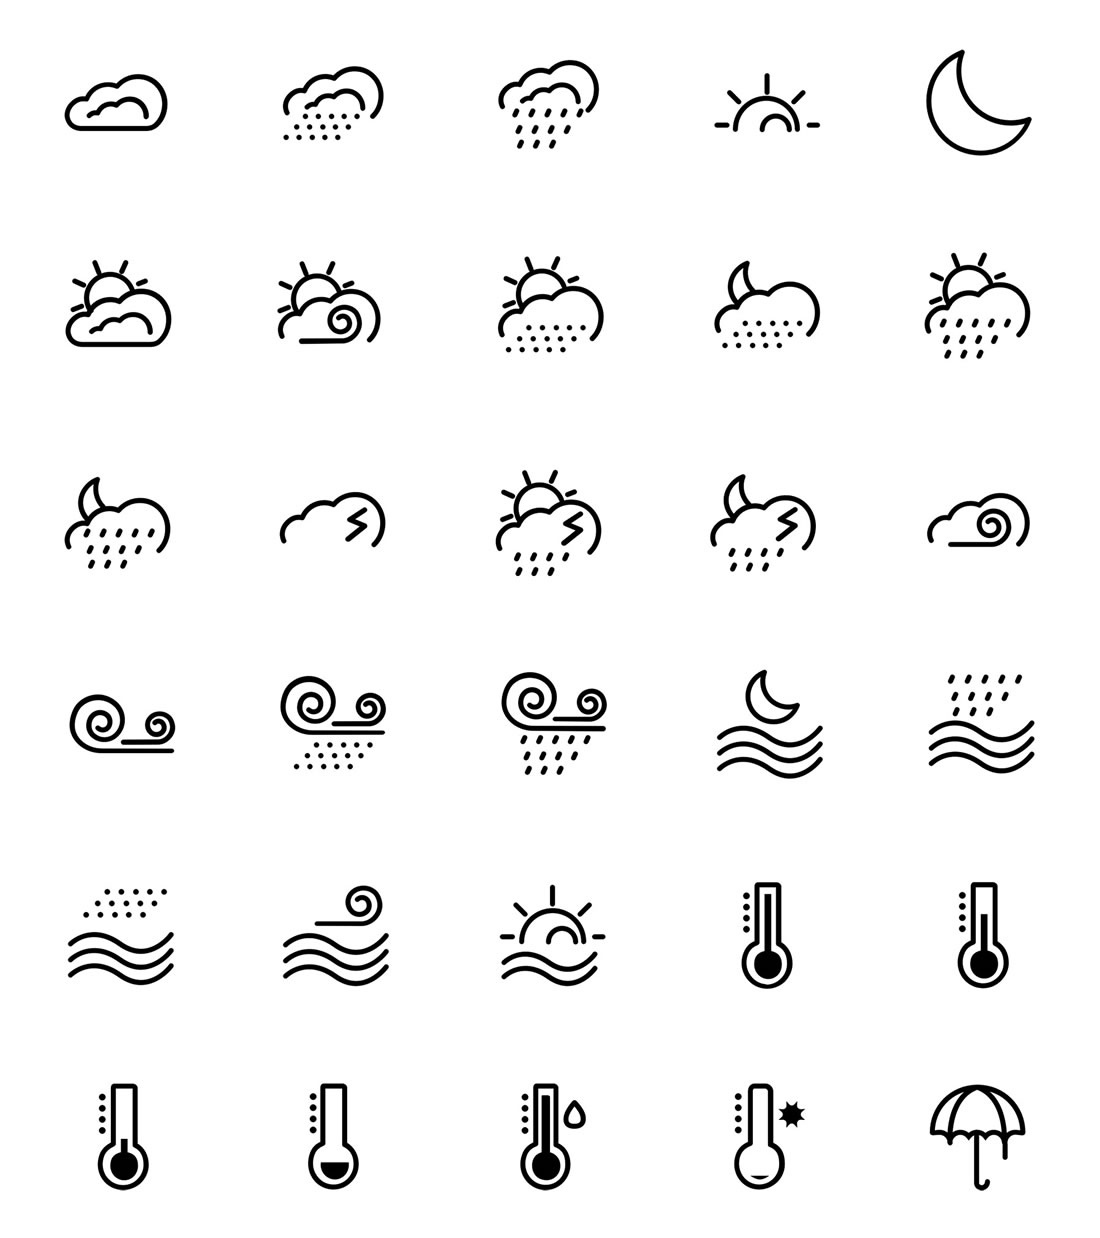 weather-icon-pack@2x.jpg